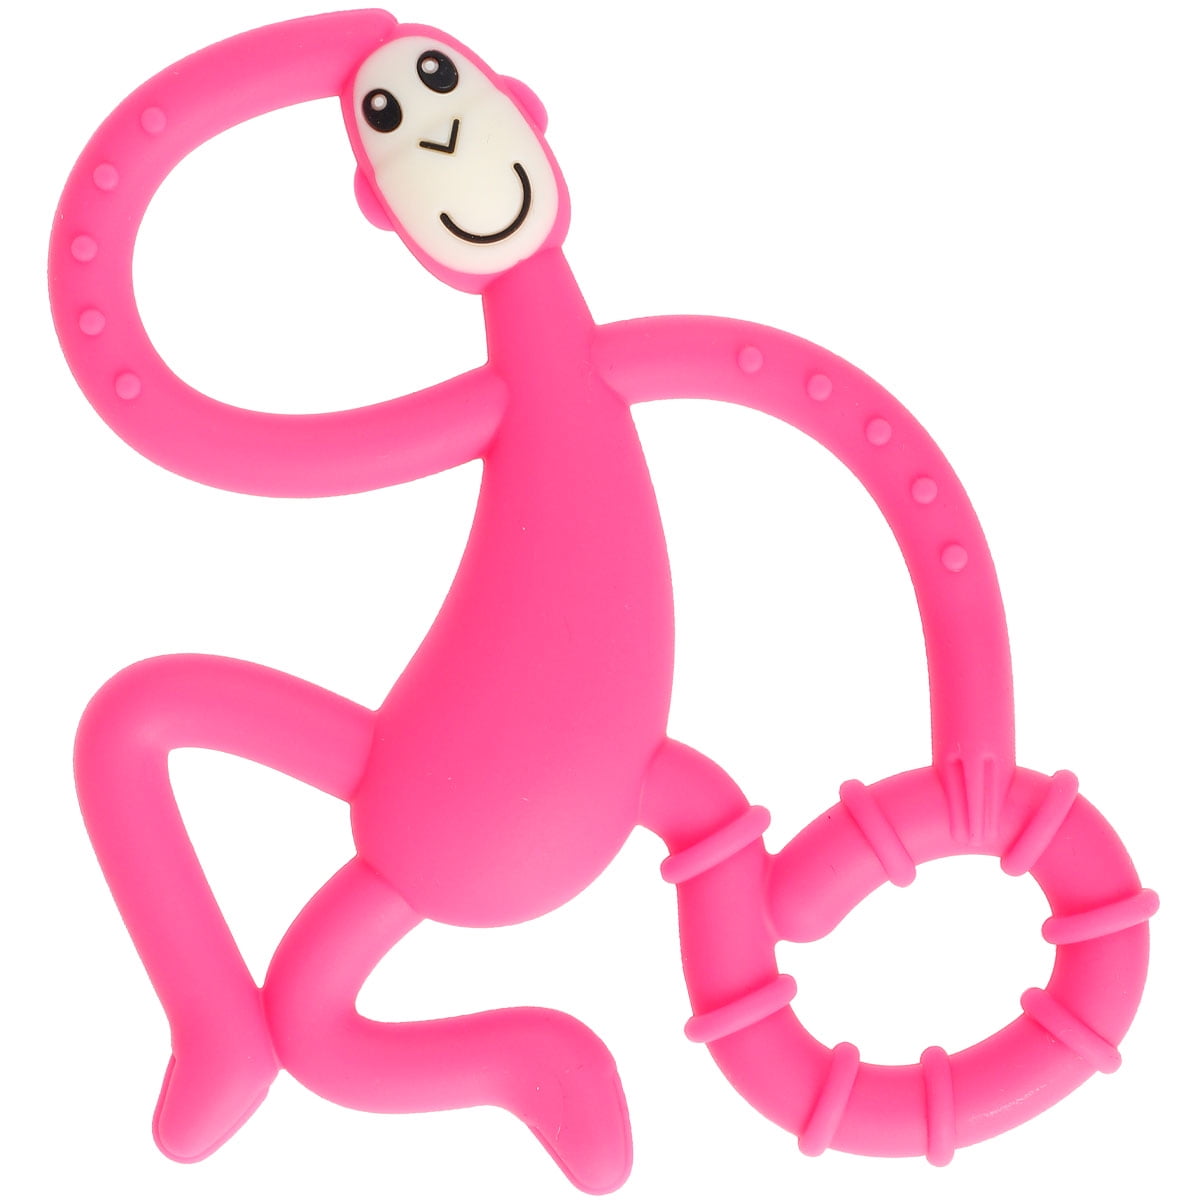 Cute Baby Teether Toddler Infant Perfect Soothing Teething Toy BPA Free Pink 